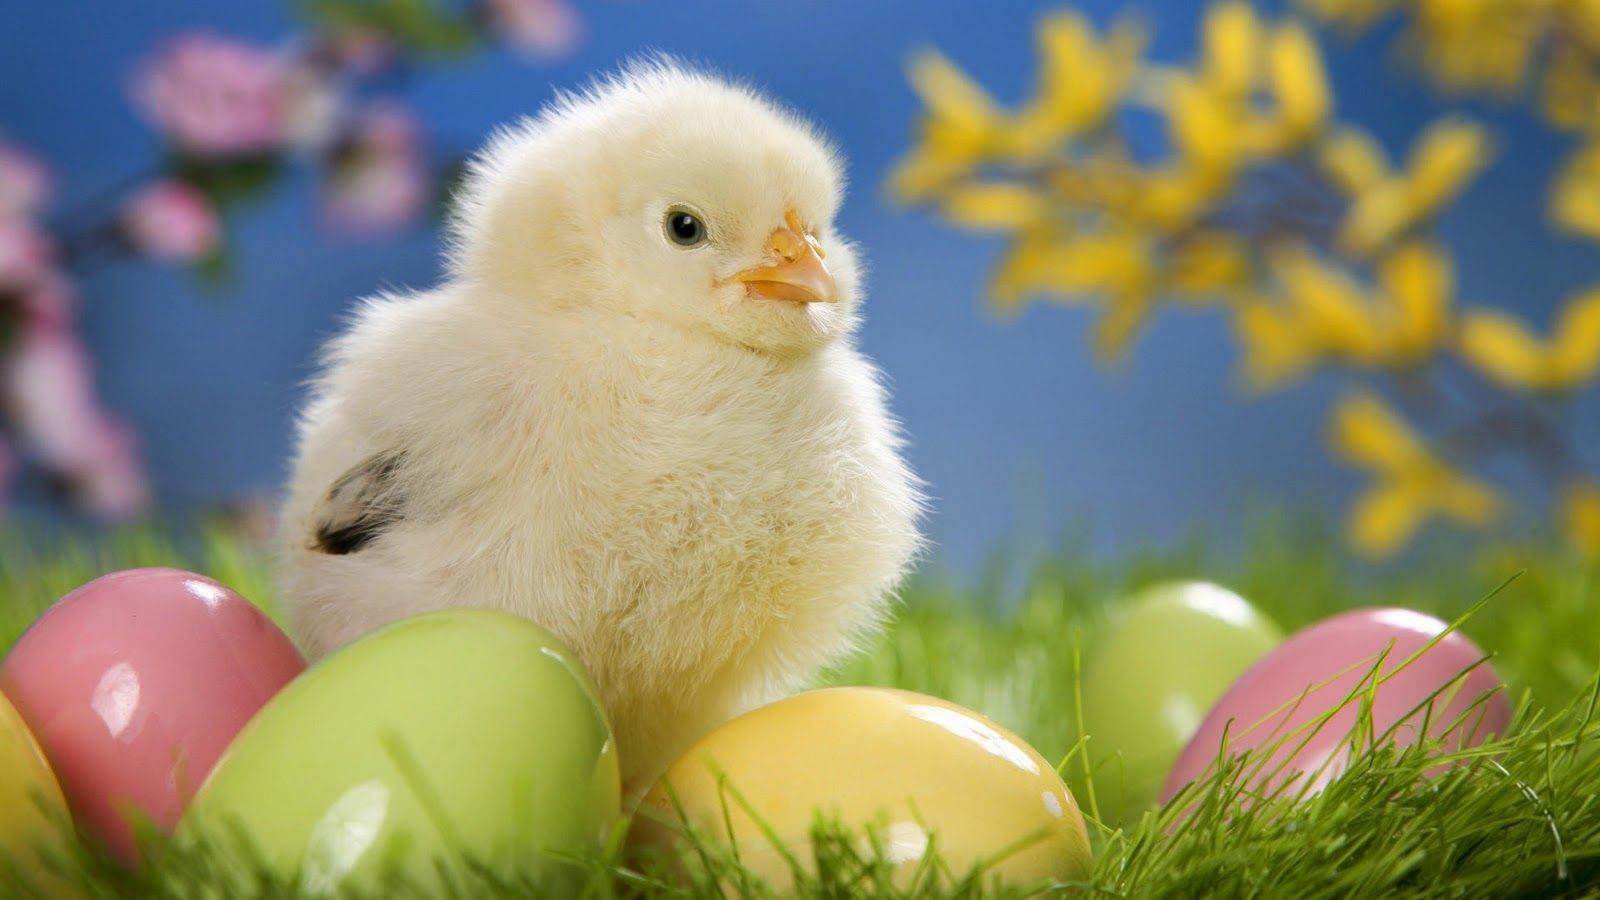 Nice Wallpapers Free Download - Cute Easter Animals - HD Wallpaper 